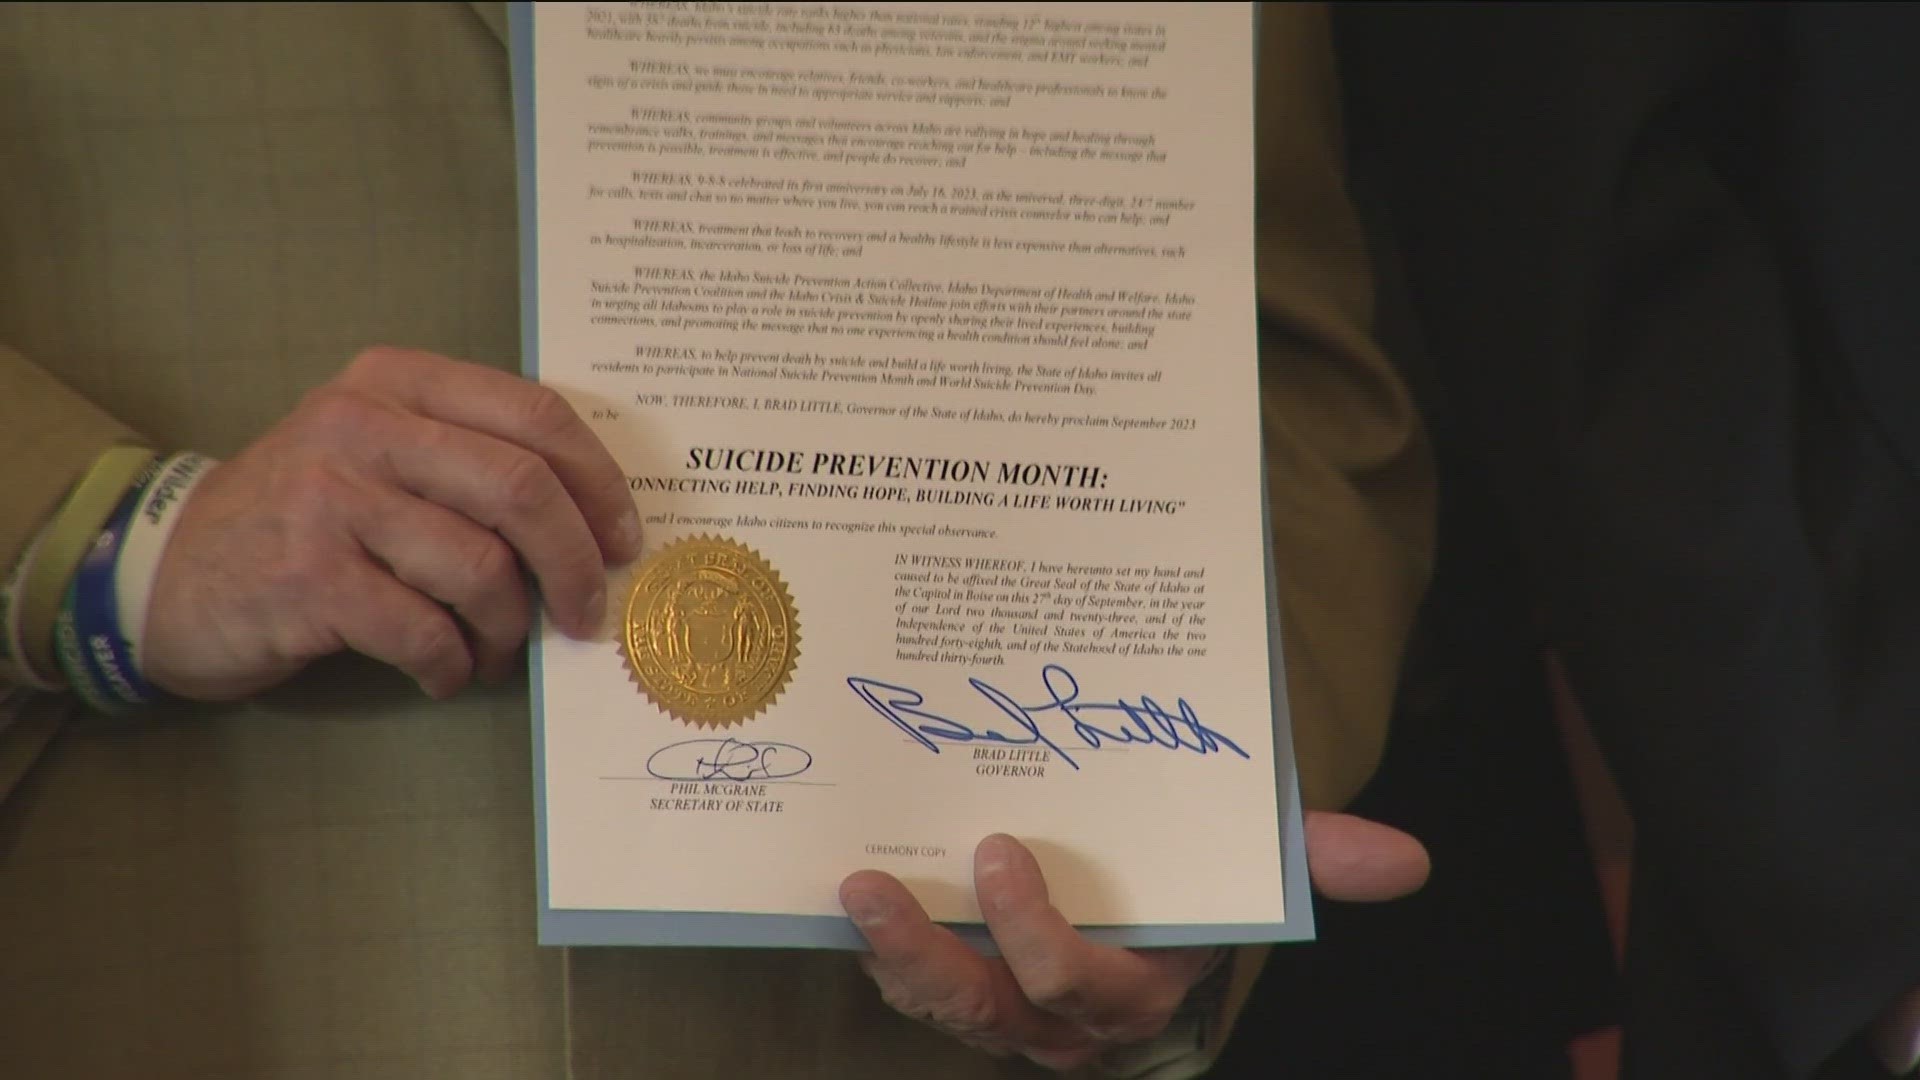 Idaho Governor Brad Little signs executive order to support suicide prevention in Idaho and proclaims September as Suicide Prevention Month in the Gem State.